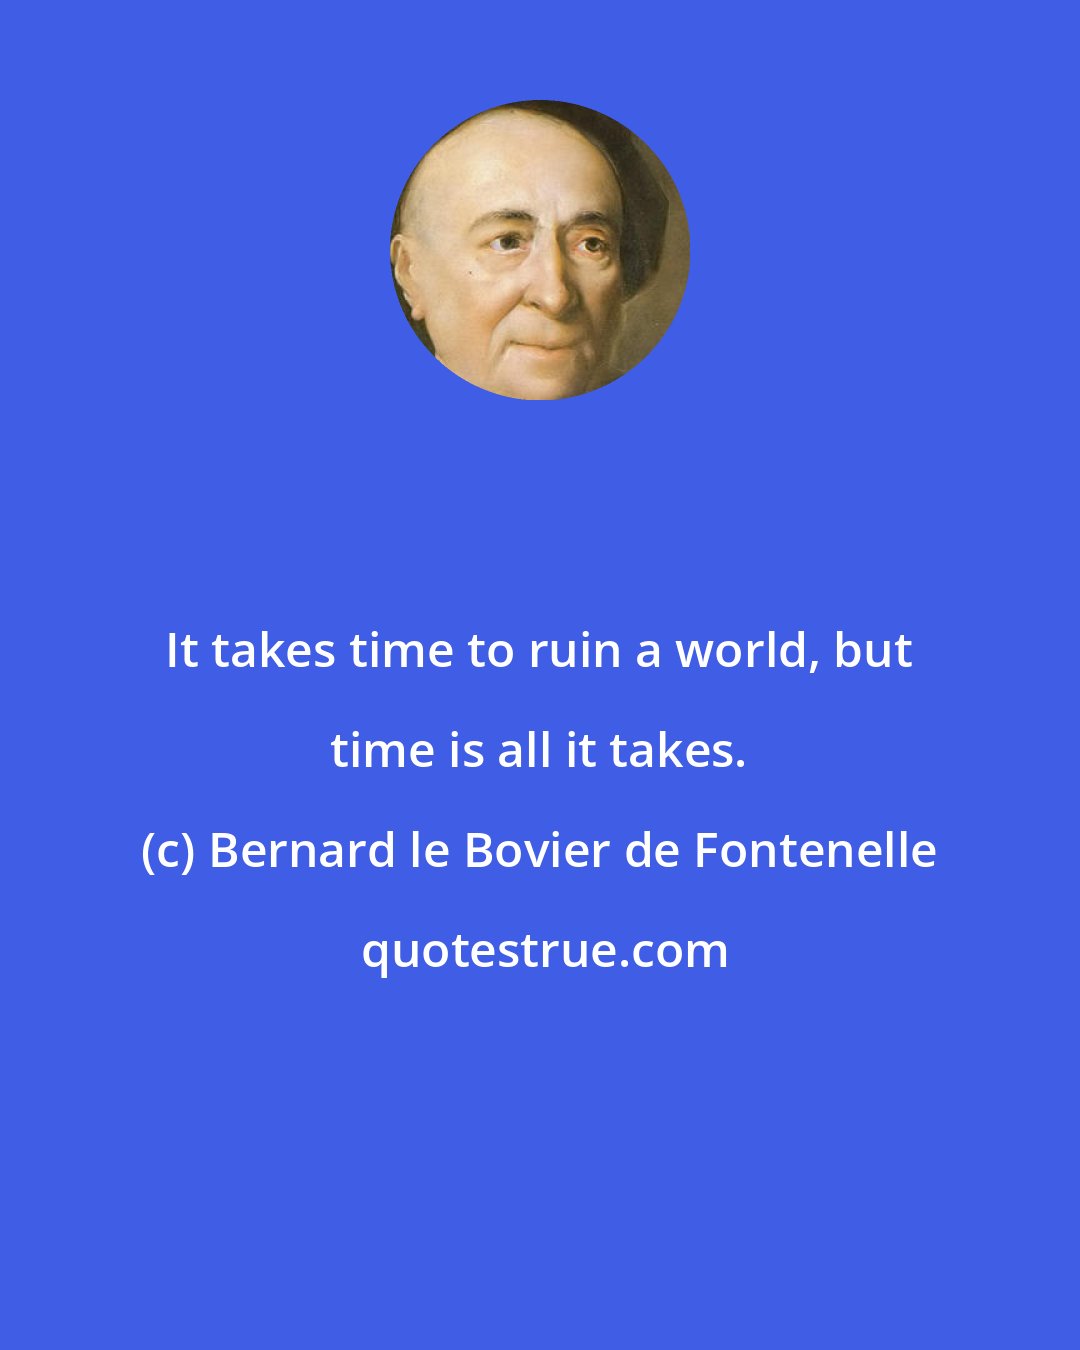 Bernard le Bovier de Fontenelle: It takes time to ruin a world, but time is all it takes.